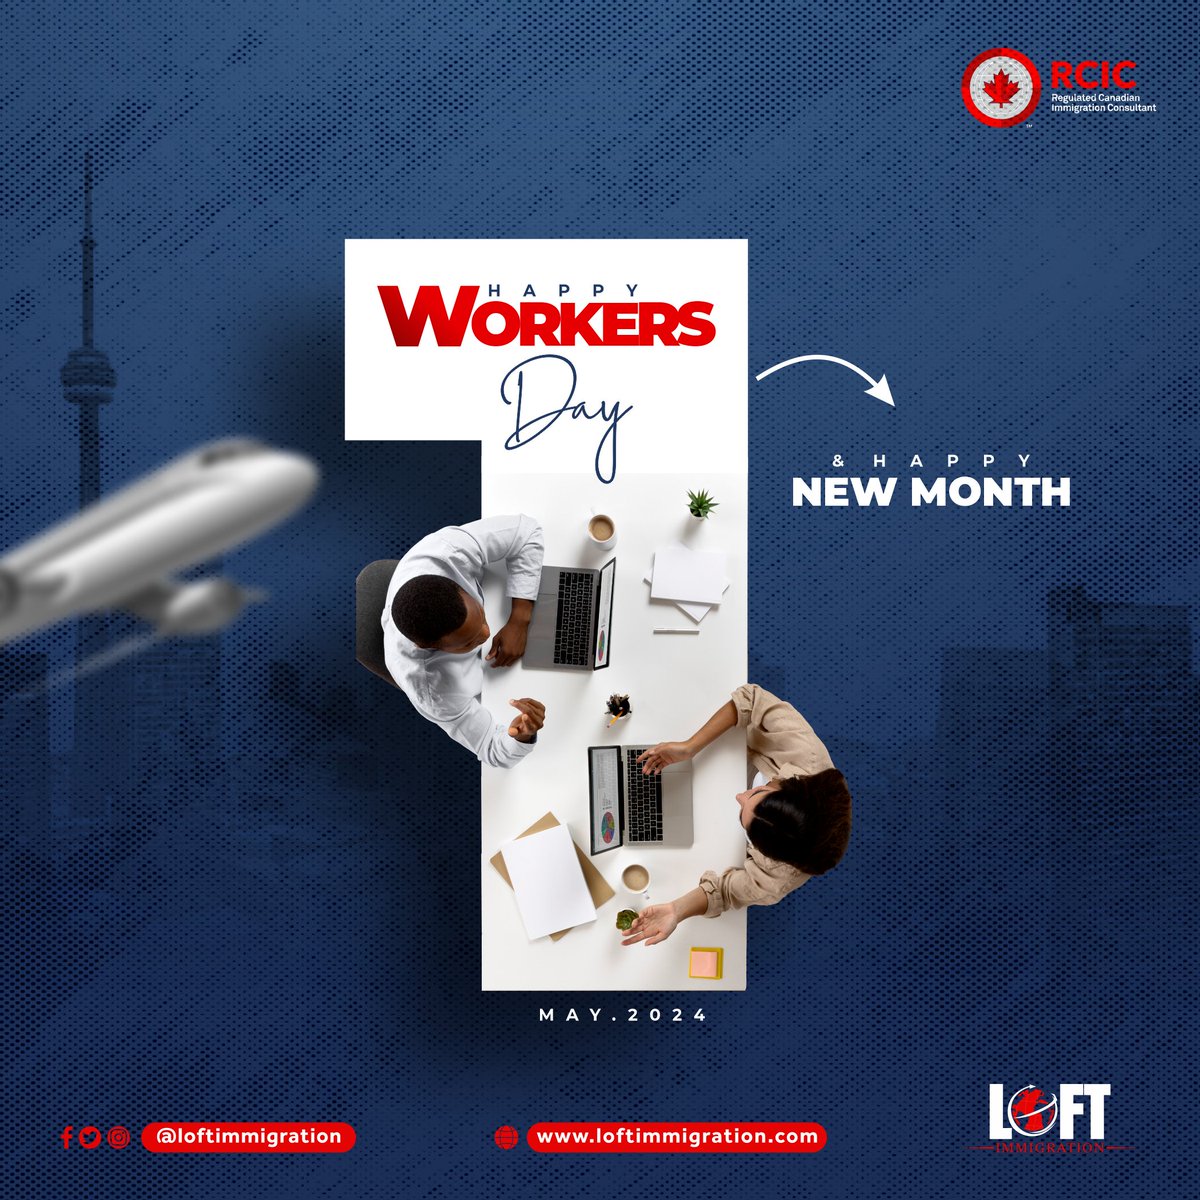 Experience endless possibilities in all aspects of your life. Happy New Month and Happy Worker's Day ❤
#loftimmigration #newmonth #canadabusinessimmigration